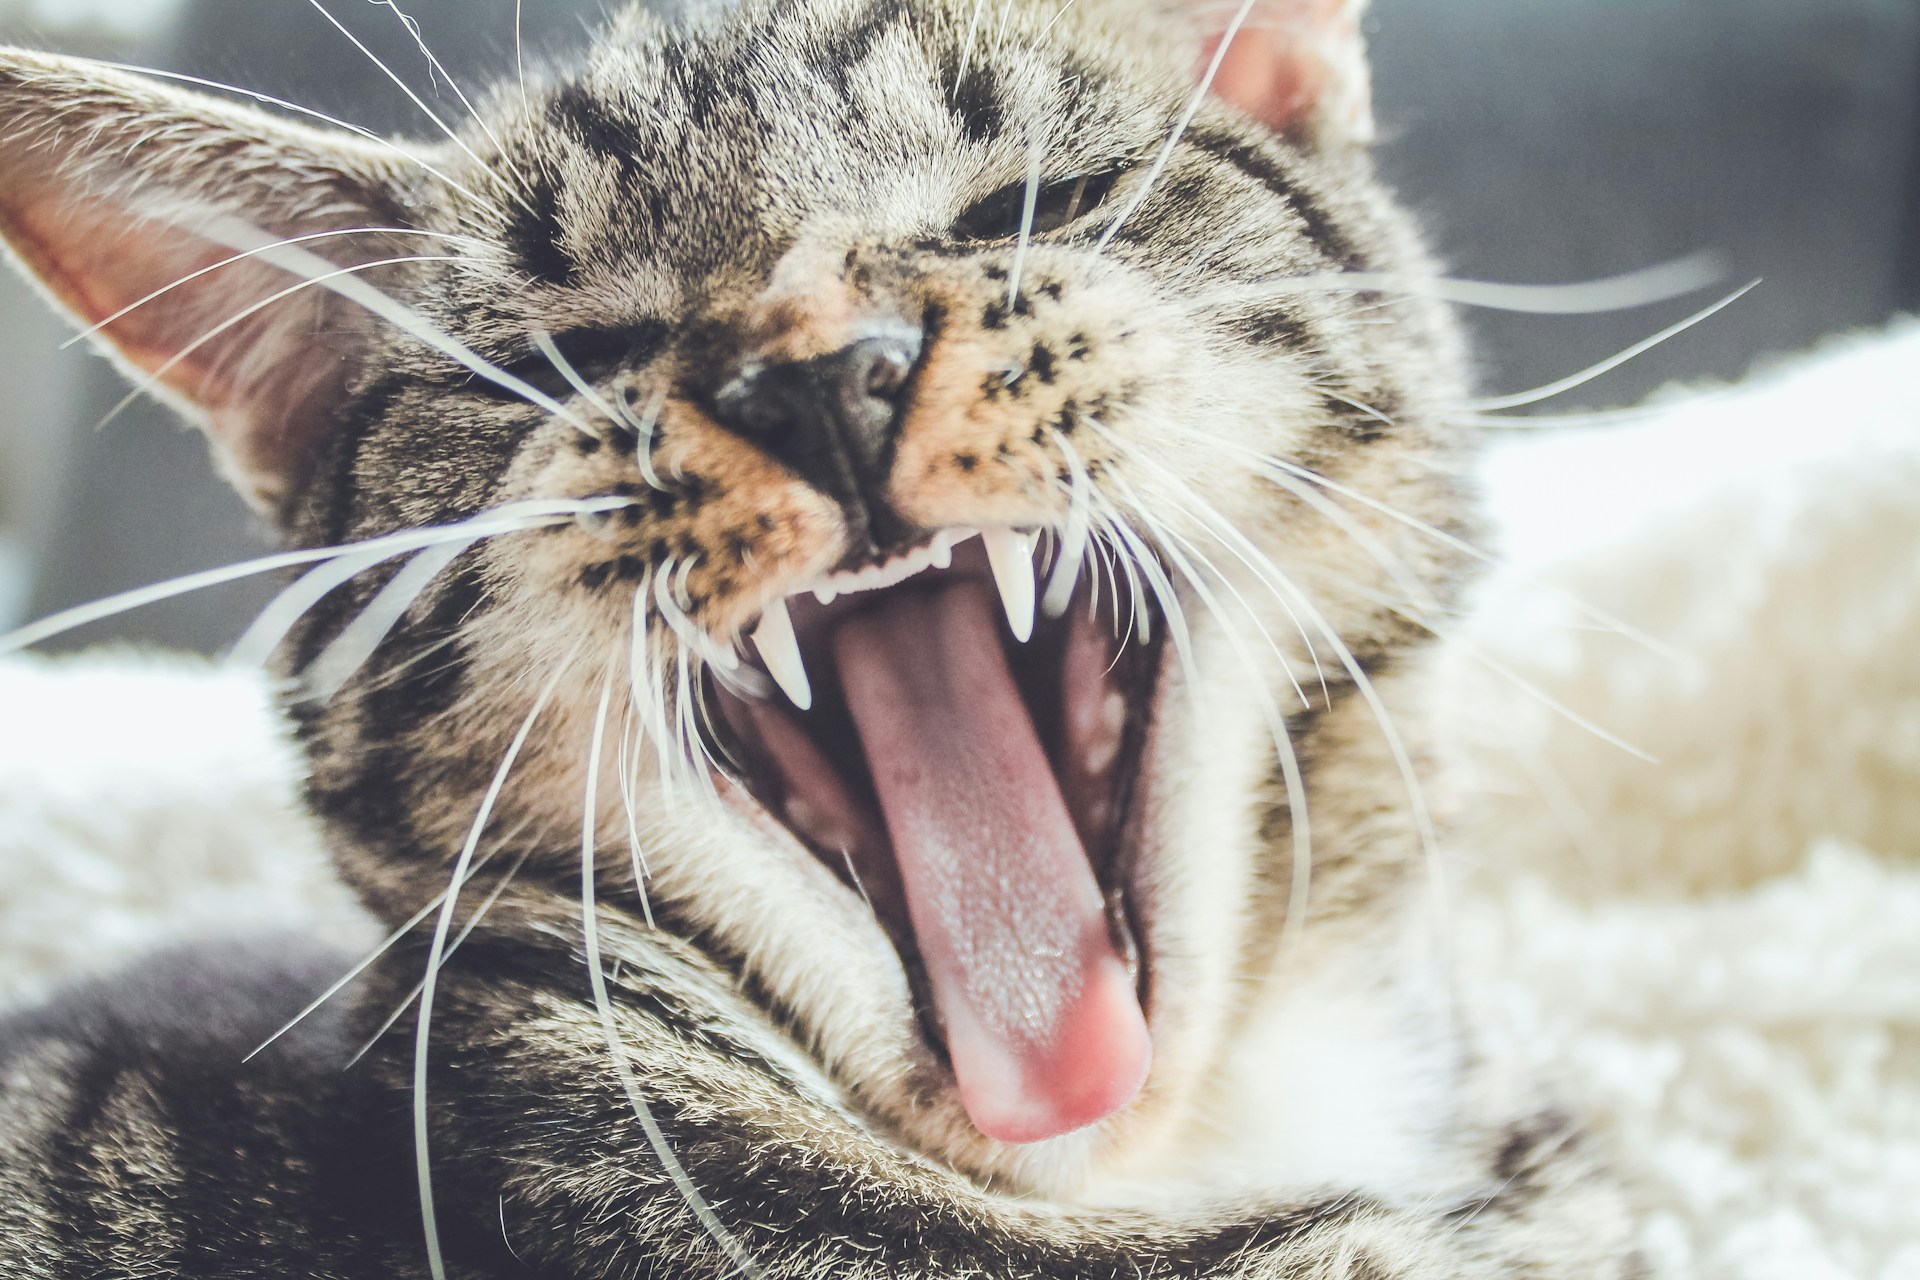 Description: A close-up photo of a cat yawning.  Its teeth are prominently featured. Photo by Erik-Jan Leusink on Unsplash.